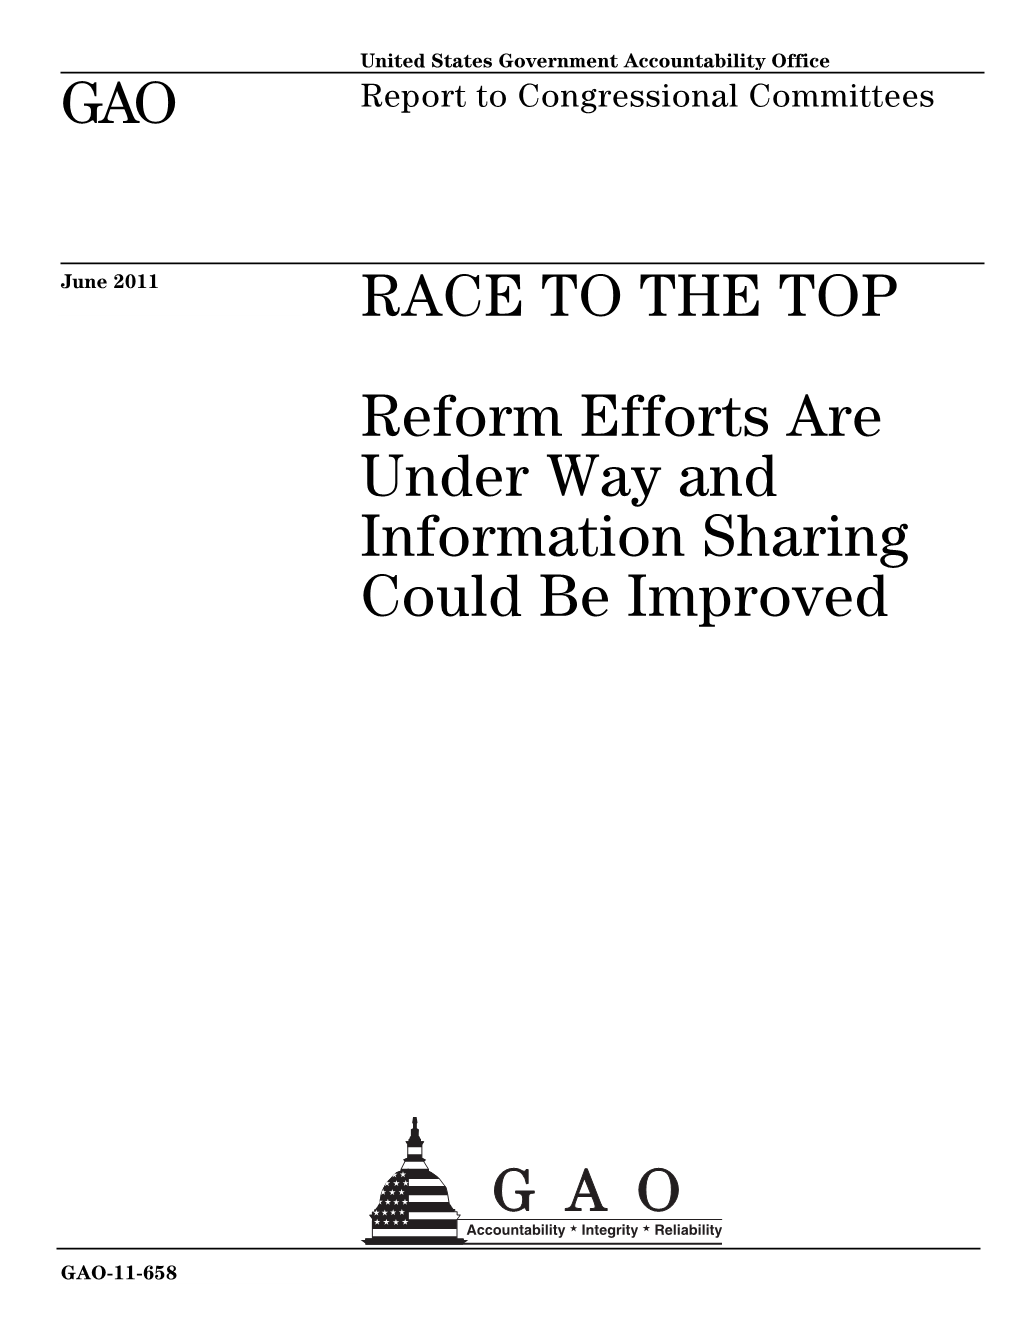 Race to the Top: Reform Efforts Are Under Way and Information Sharing Could Be Improved. Report to Congressional Committees. GAO-11-658